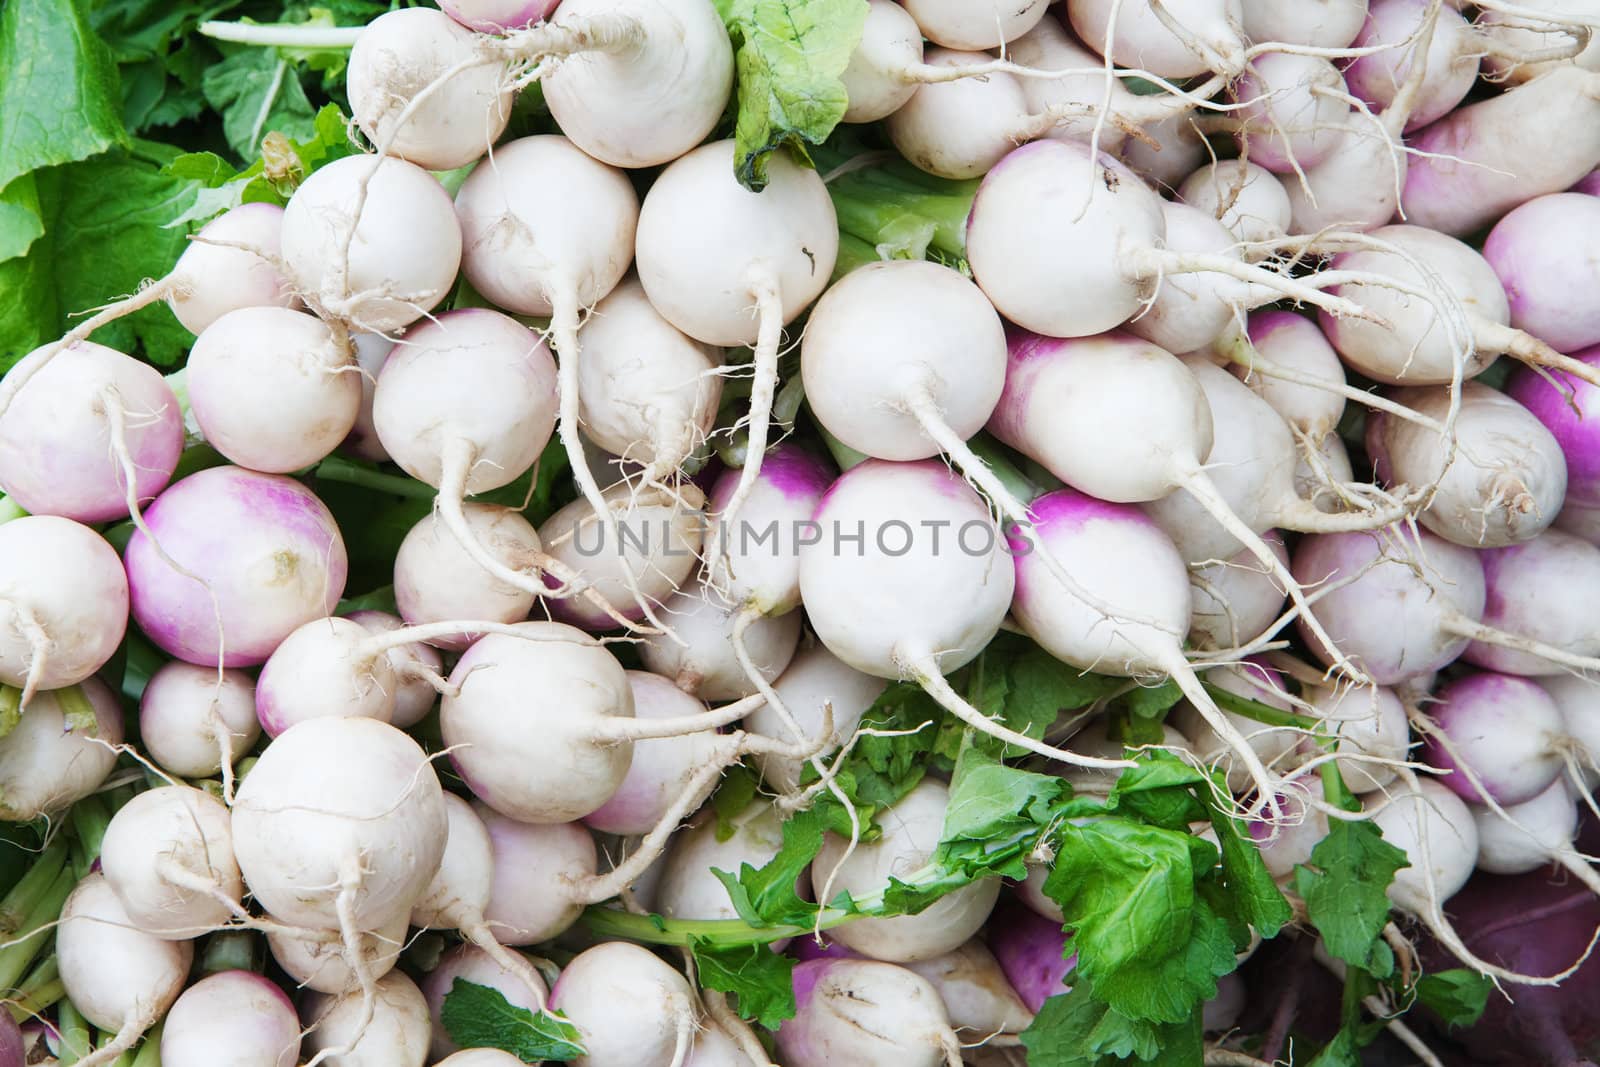 Pile of white and violet radishes at the farmers market with green leaves